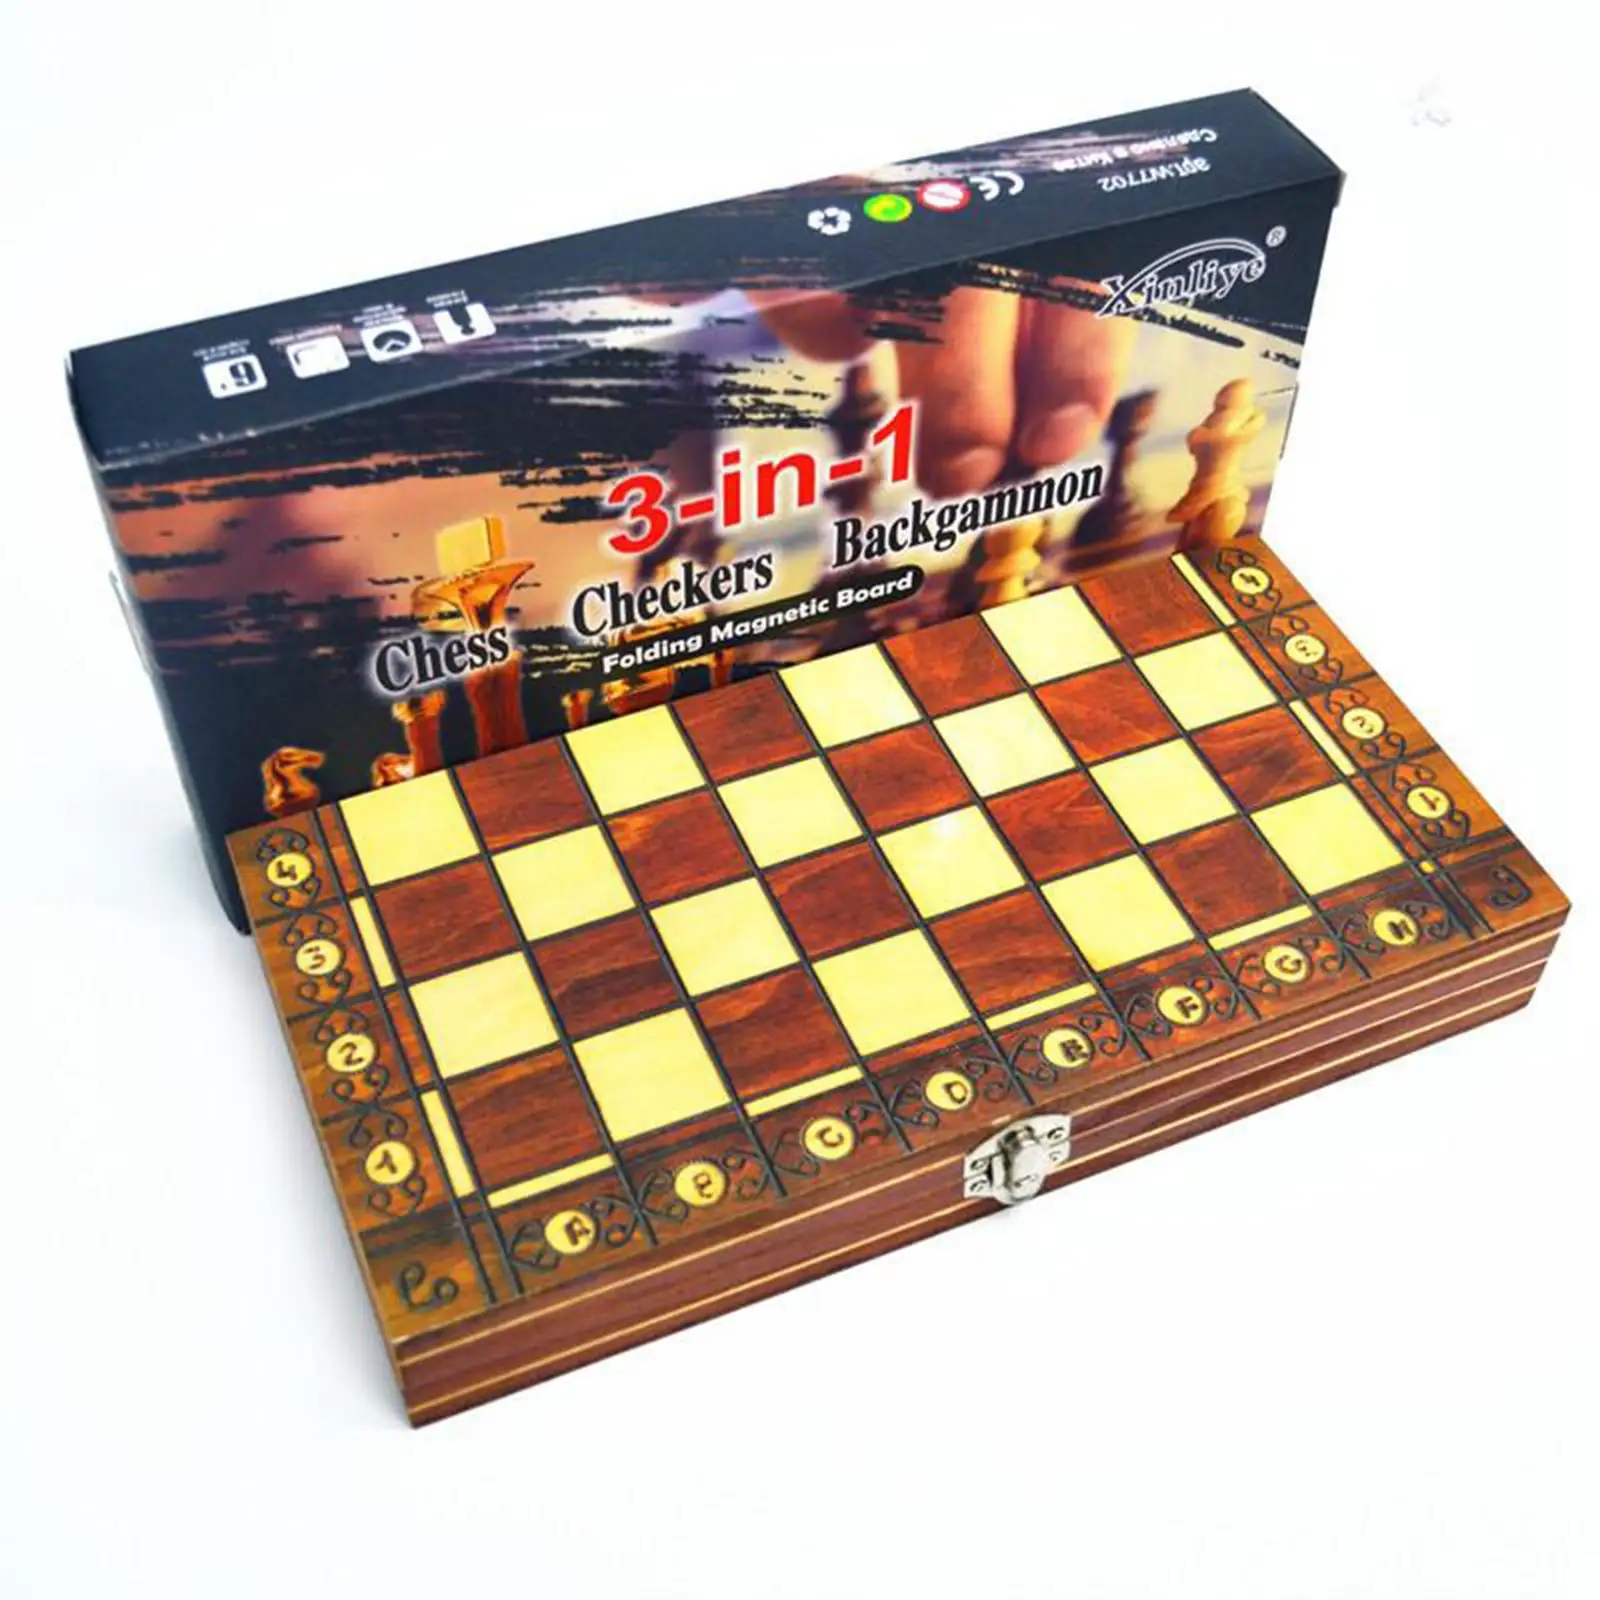 3 in 1 Wooden Folding Board Toys Chess, Checkers, Backgammon for Kids 34x34cm